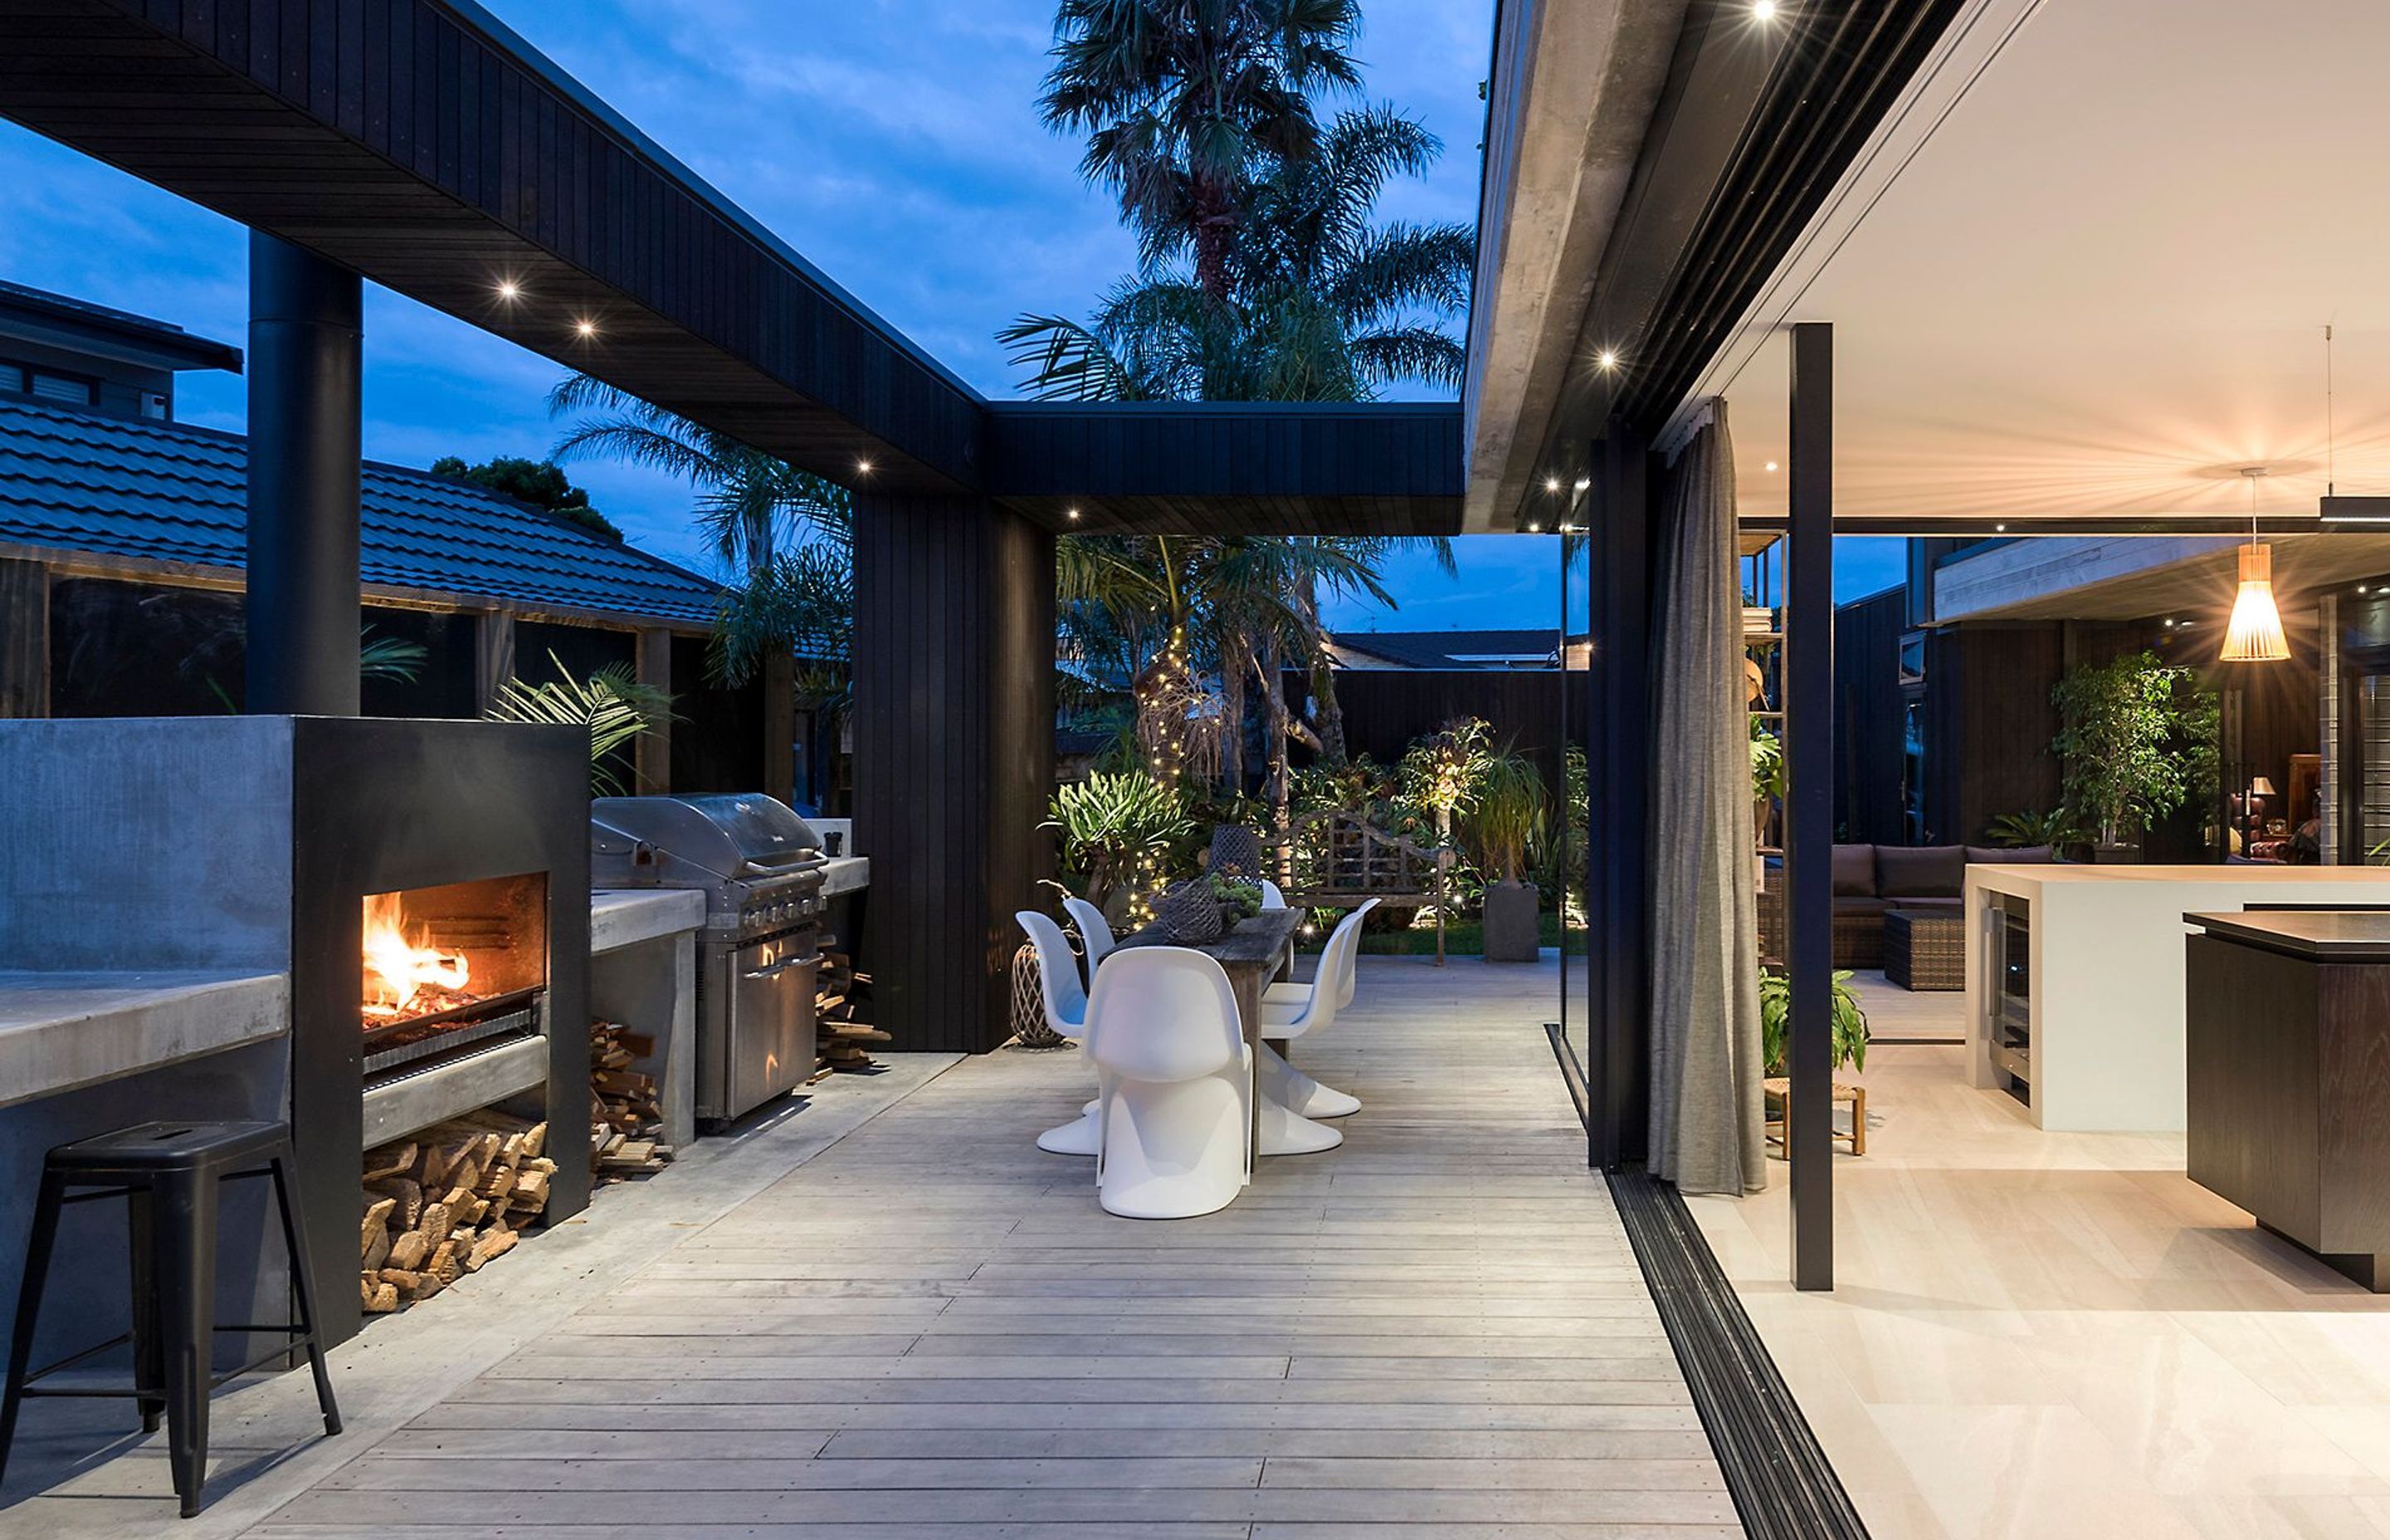 The outdoor kitchen and dining area flows directly into the internal kitchen via sliding doors that can be pushed completely back and out of the way.